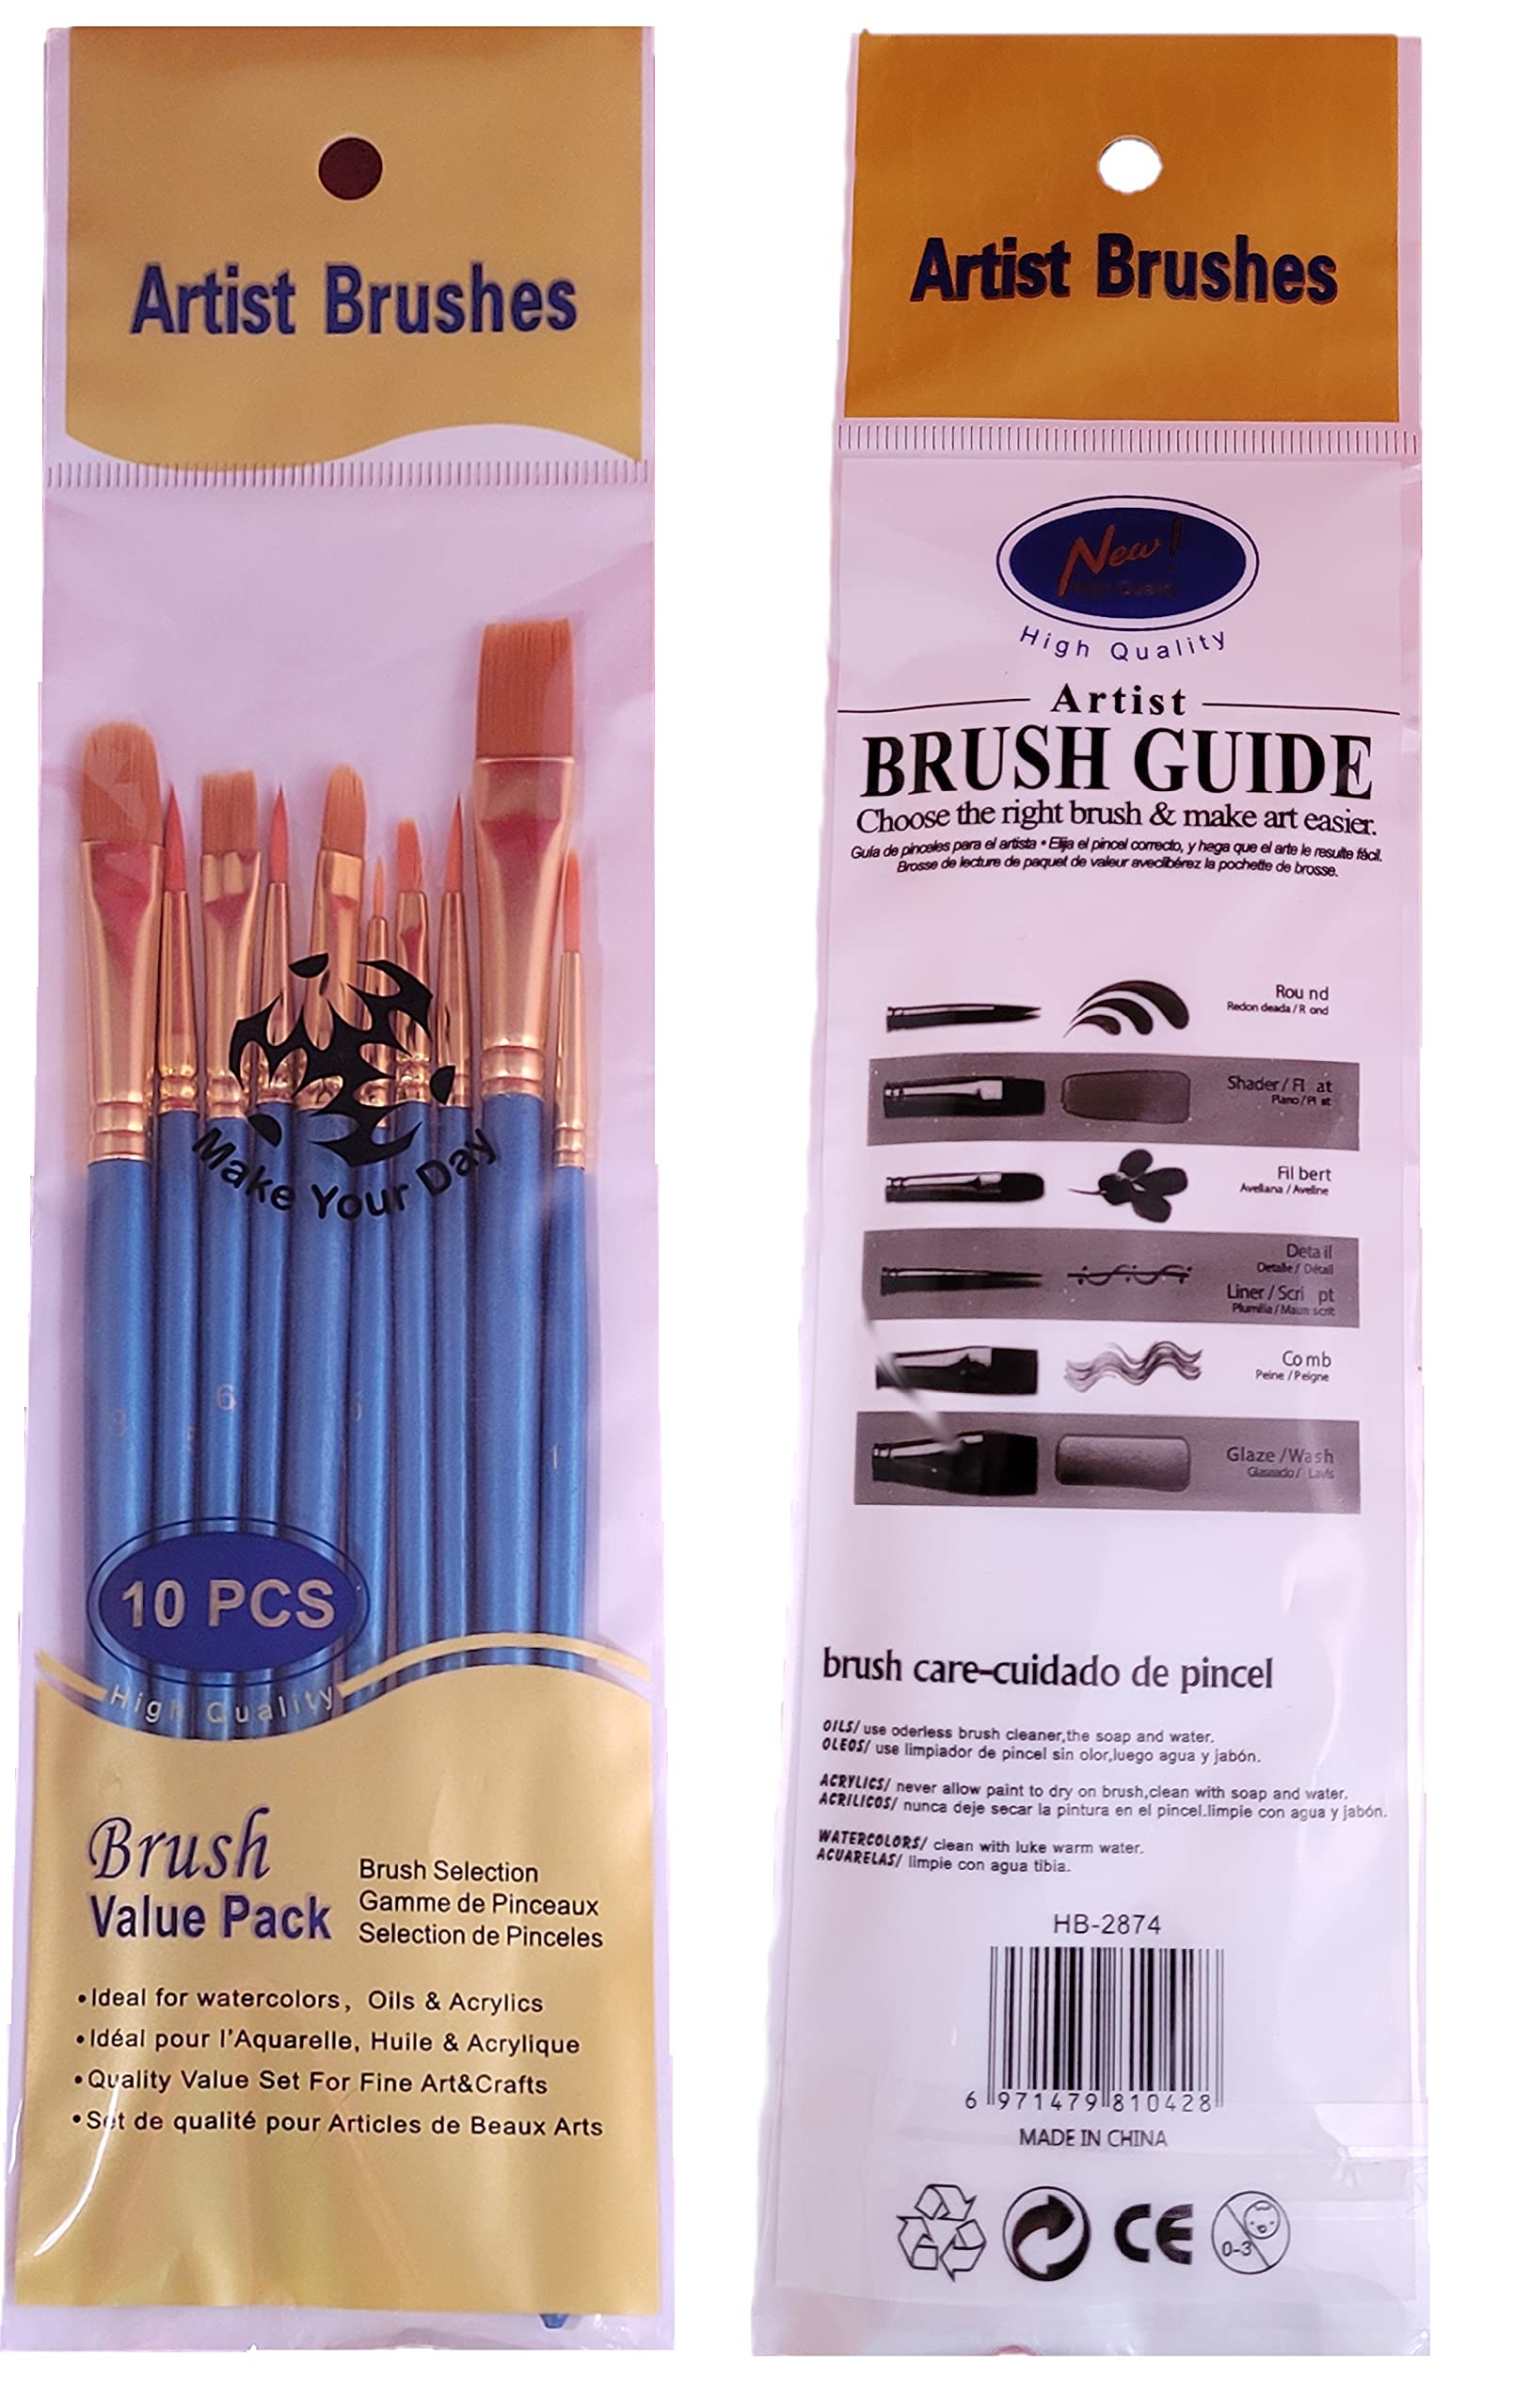 Make Your Day Testors Enamel Paint, Magenta, Gloss Teal, Gloss Grape, Gloss Turquoise, Gloss Sublime, Gloss Tangerine, and Clear Thinner, 1 3/4 Ounce (Pack of 7) Paintbrushes